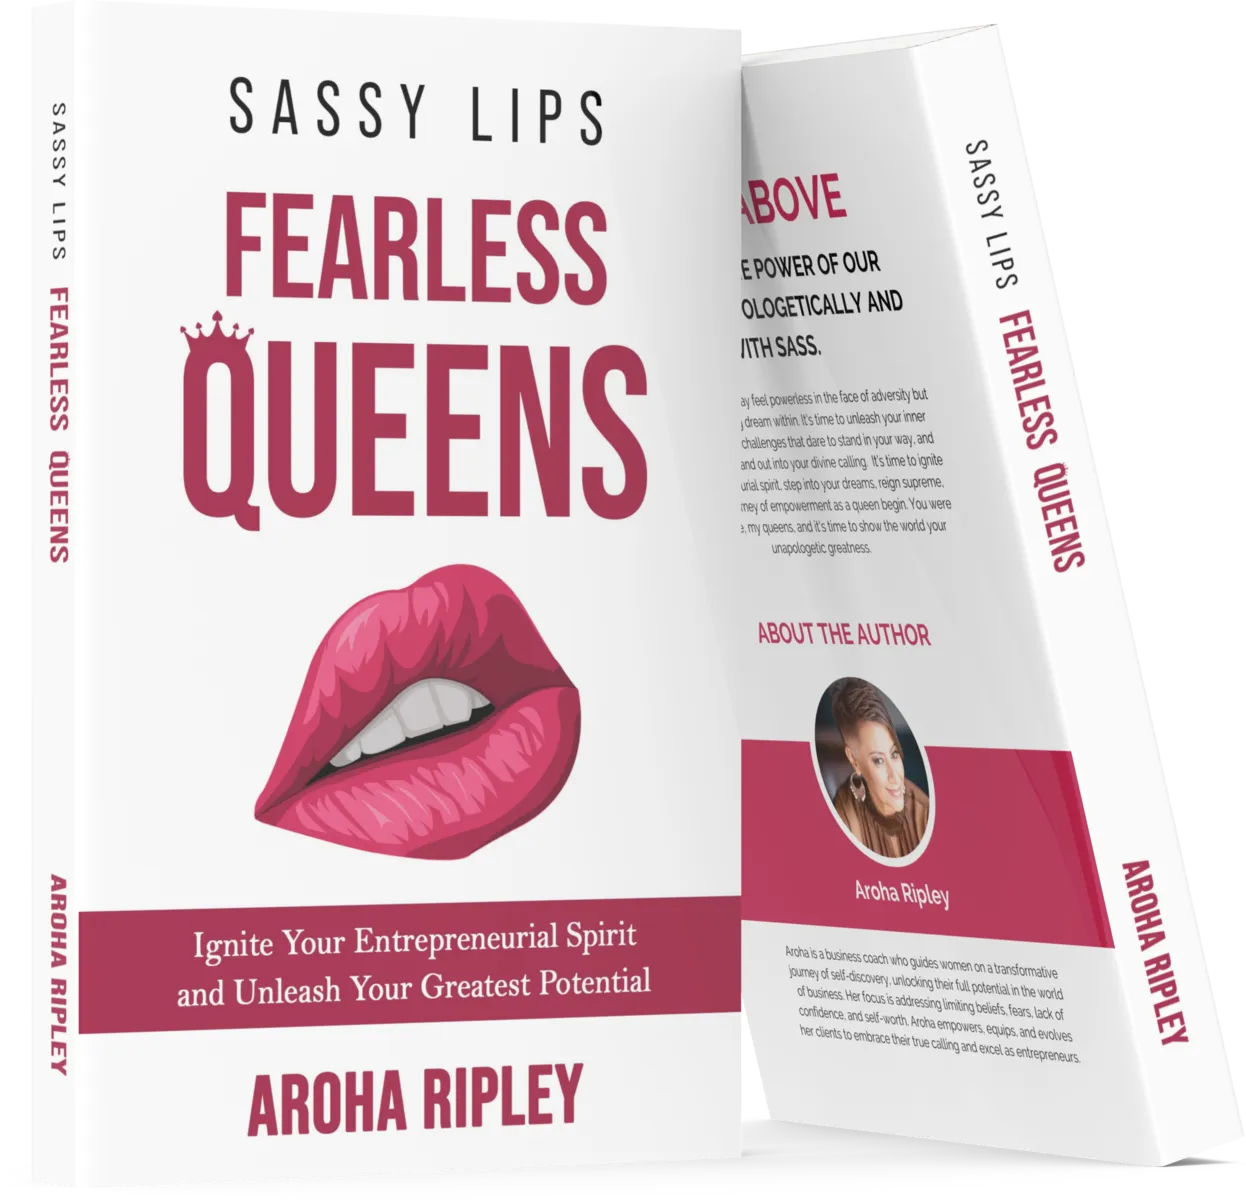 Sassy Lips Fearless Queens Book Launch Supporters